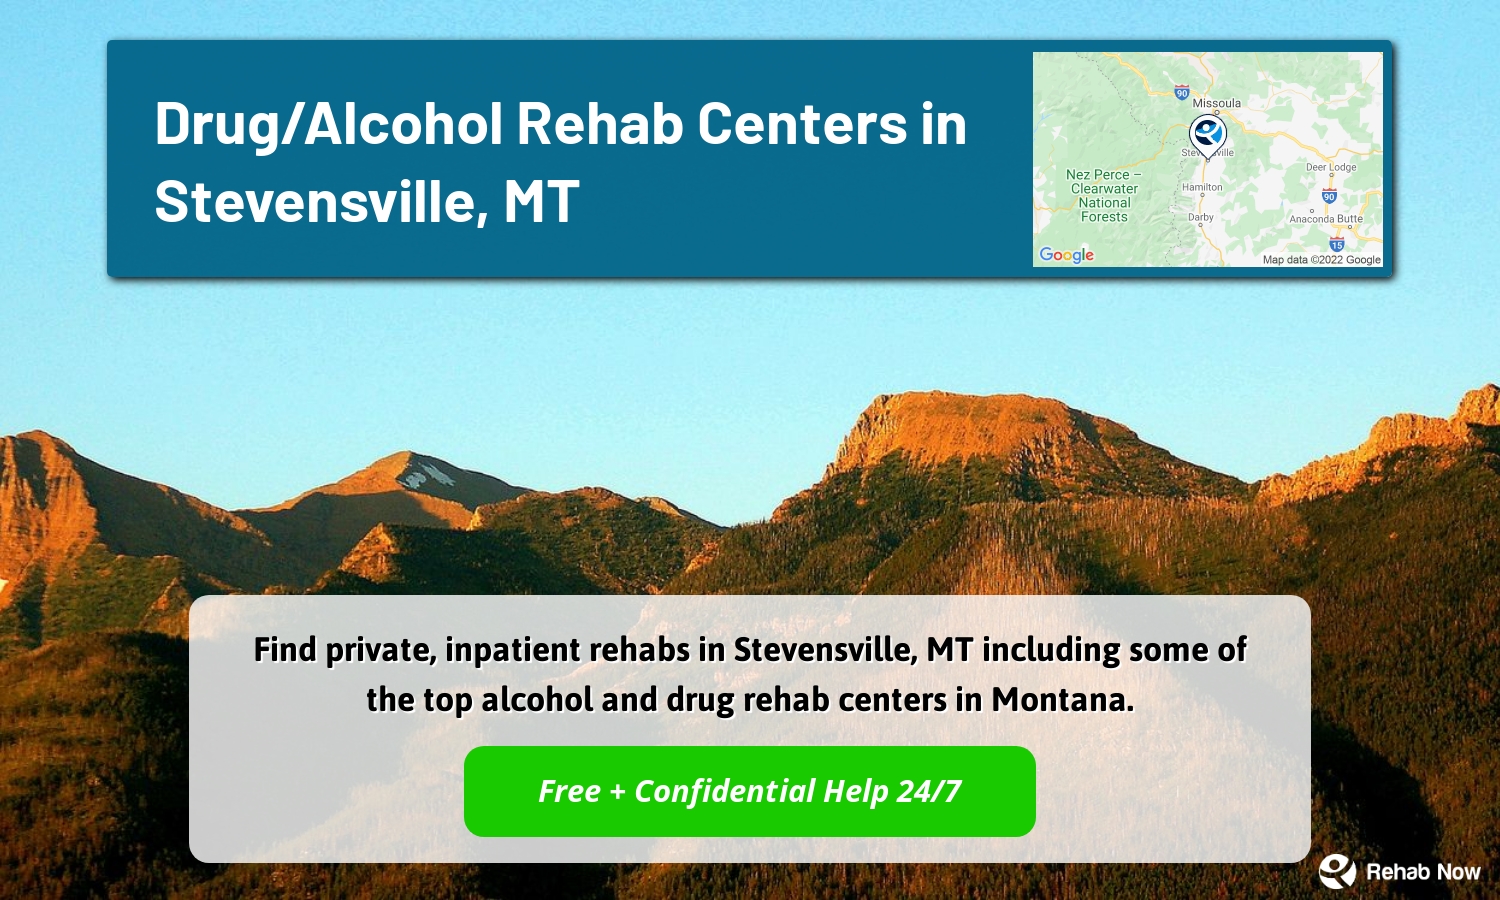 Find private, inpatient rehabs in Stevensville, MT including some of the top alcohol and drug rehab centers in Montana.